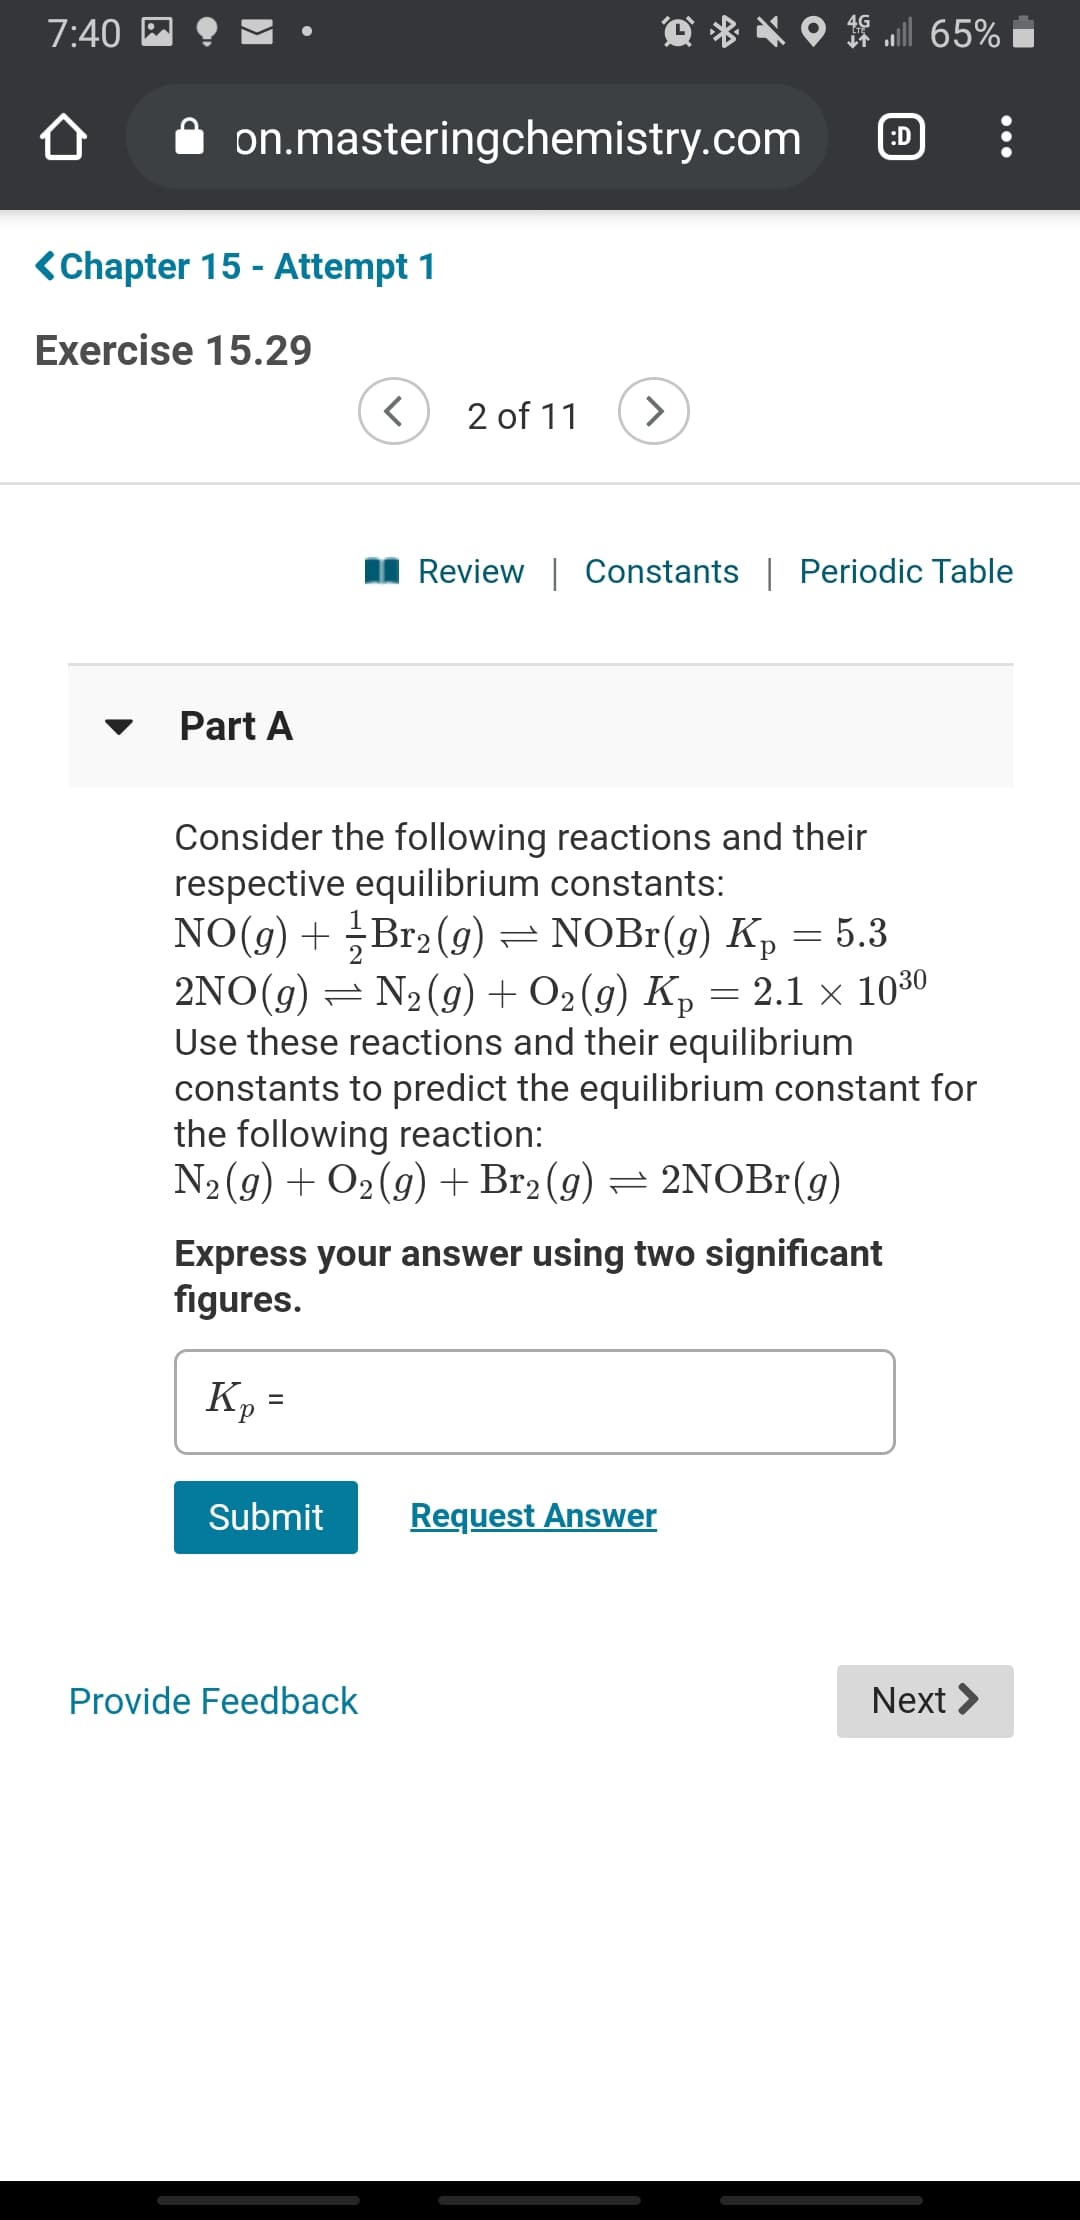 7:40
l 65%
on.masteringchemistry.com
:D
<Chapter 15 - Attempt 1
Exercise 15.29
2 of 11
II Review | Constants | Periodic Table
Part A
Consider the following reactions and their
respective equilibrium constants:
NO(g) + Br2 (g) = NOBr(g) Kp = 5.3
2NO(g) = N2(g) + O2 (g) K, = 2.1 × 1030
Use these reactions and their equilibrium
constants to predict the equilibrium constant for
the following reaction:
N2(9) + O2(g) +Br2 (g) = 2NOBr(g)
Express your answer using two significant
figures.
Kp =
Submit
Request Answer
Provide Feedback
Next >
